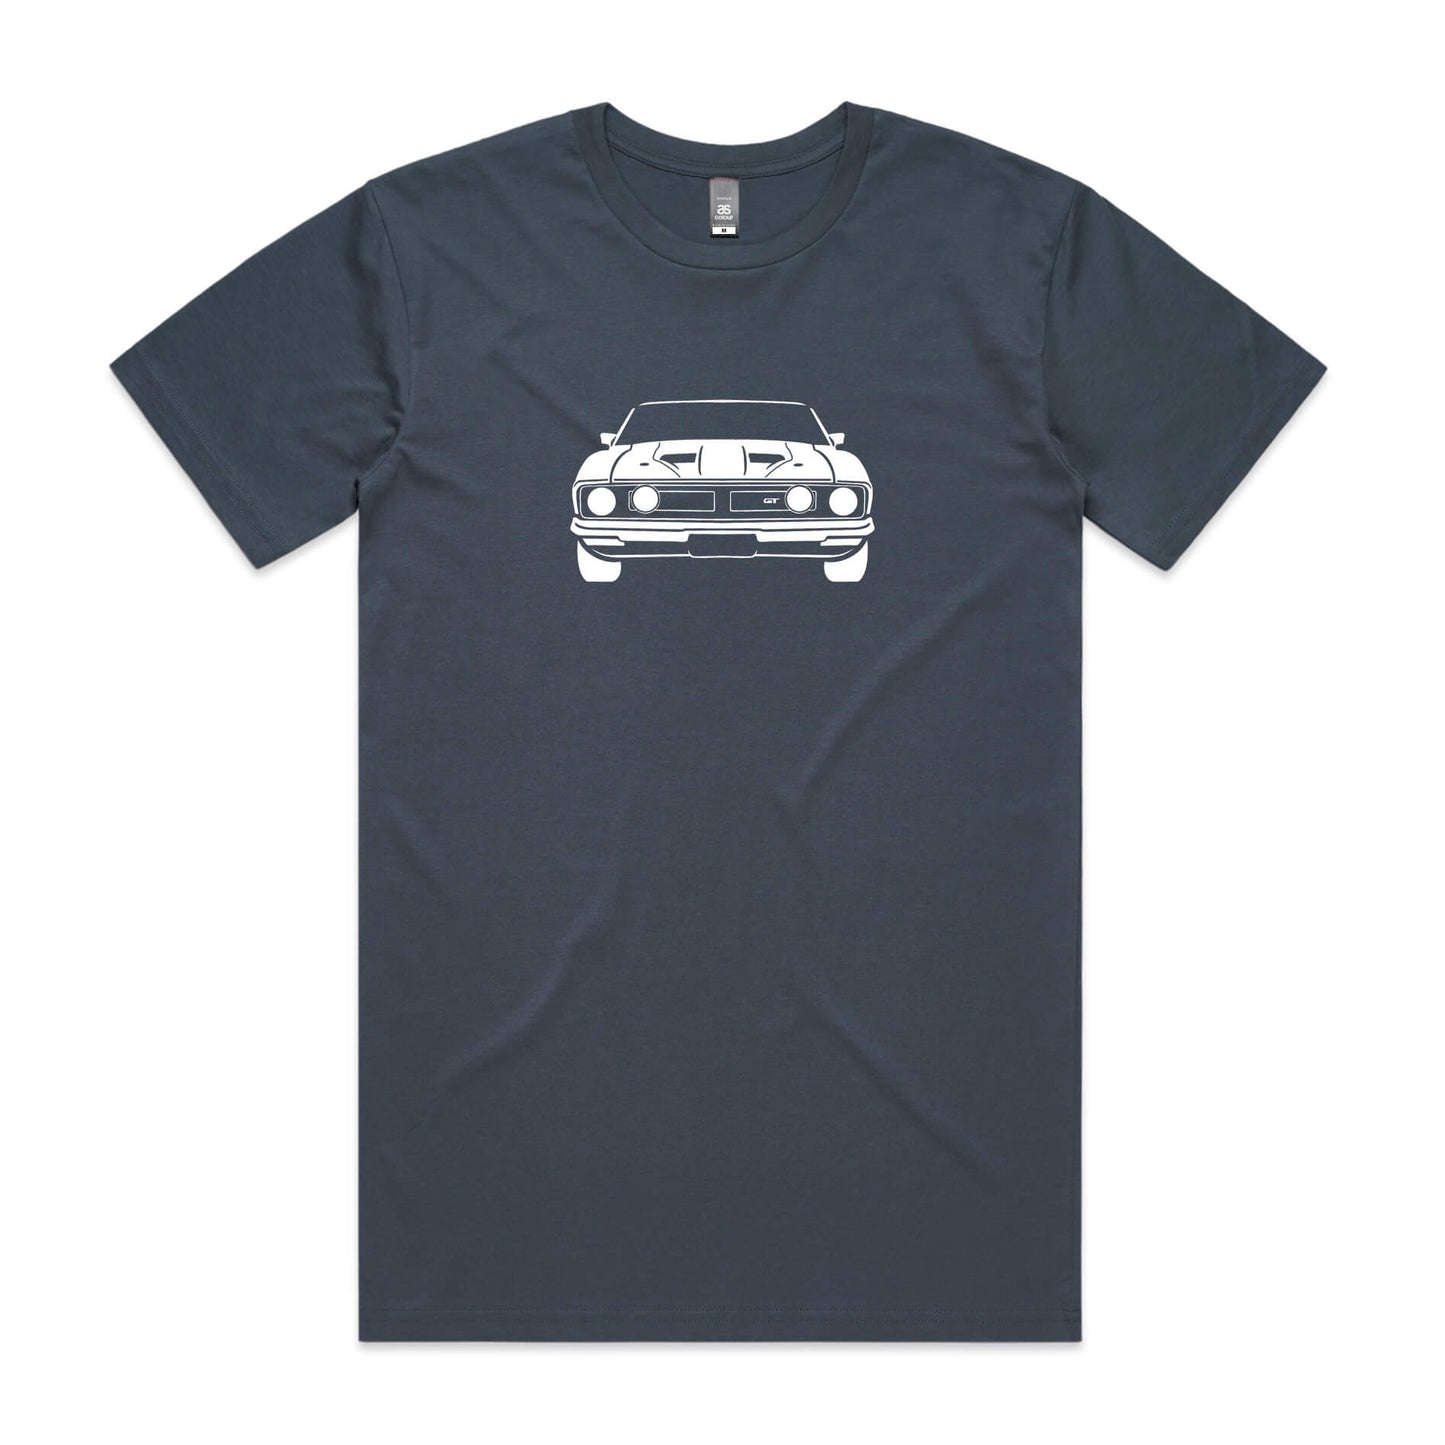 Ford XB Falcon t-shirt in Petrol with a black coupe graphic